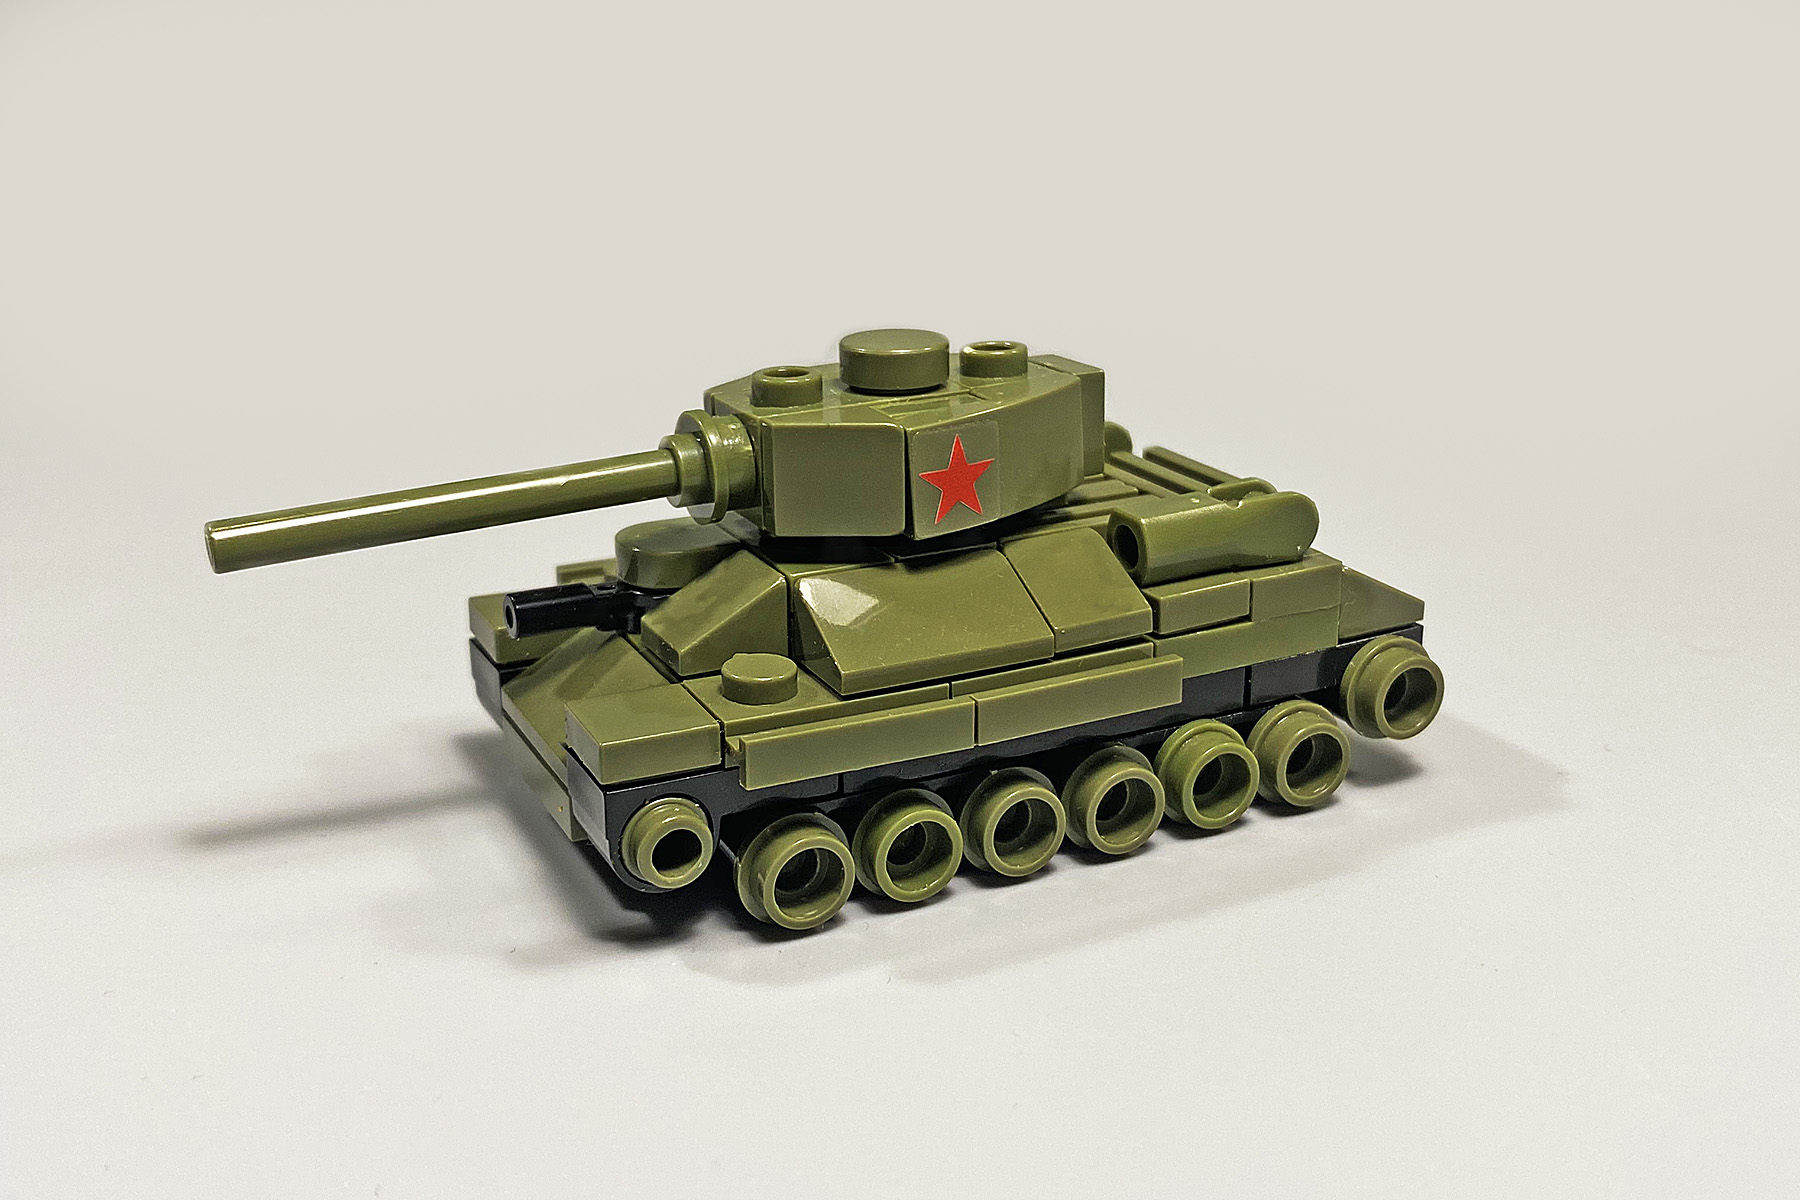 https://buildarmy.com/wp-content/uploads/2021/07/Micro-T34-85-by-Buildarmy.jpg